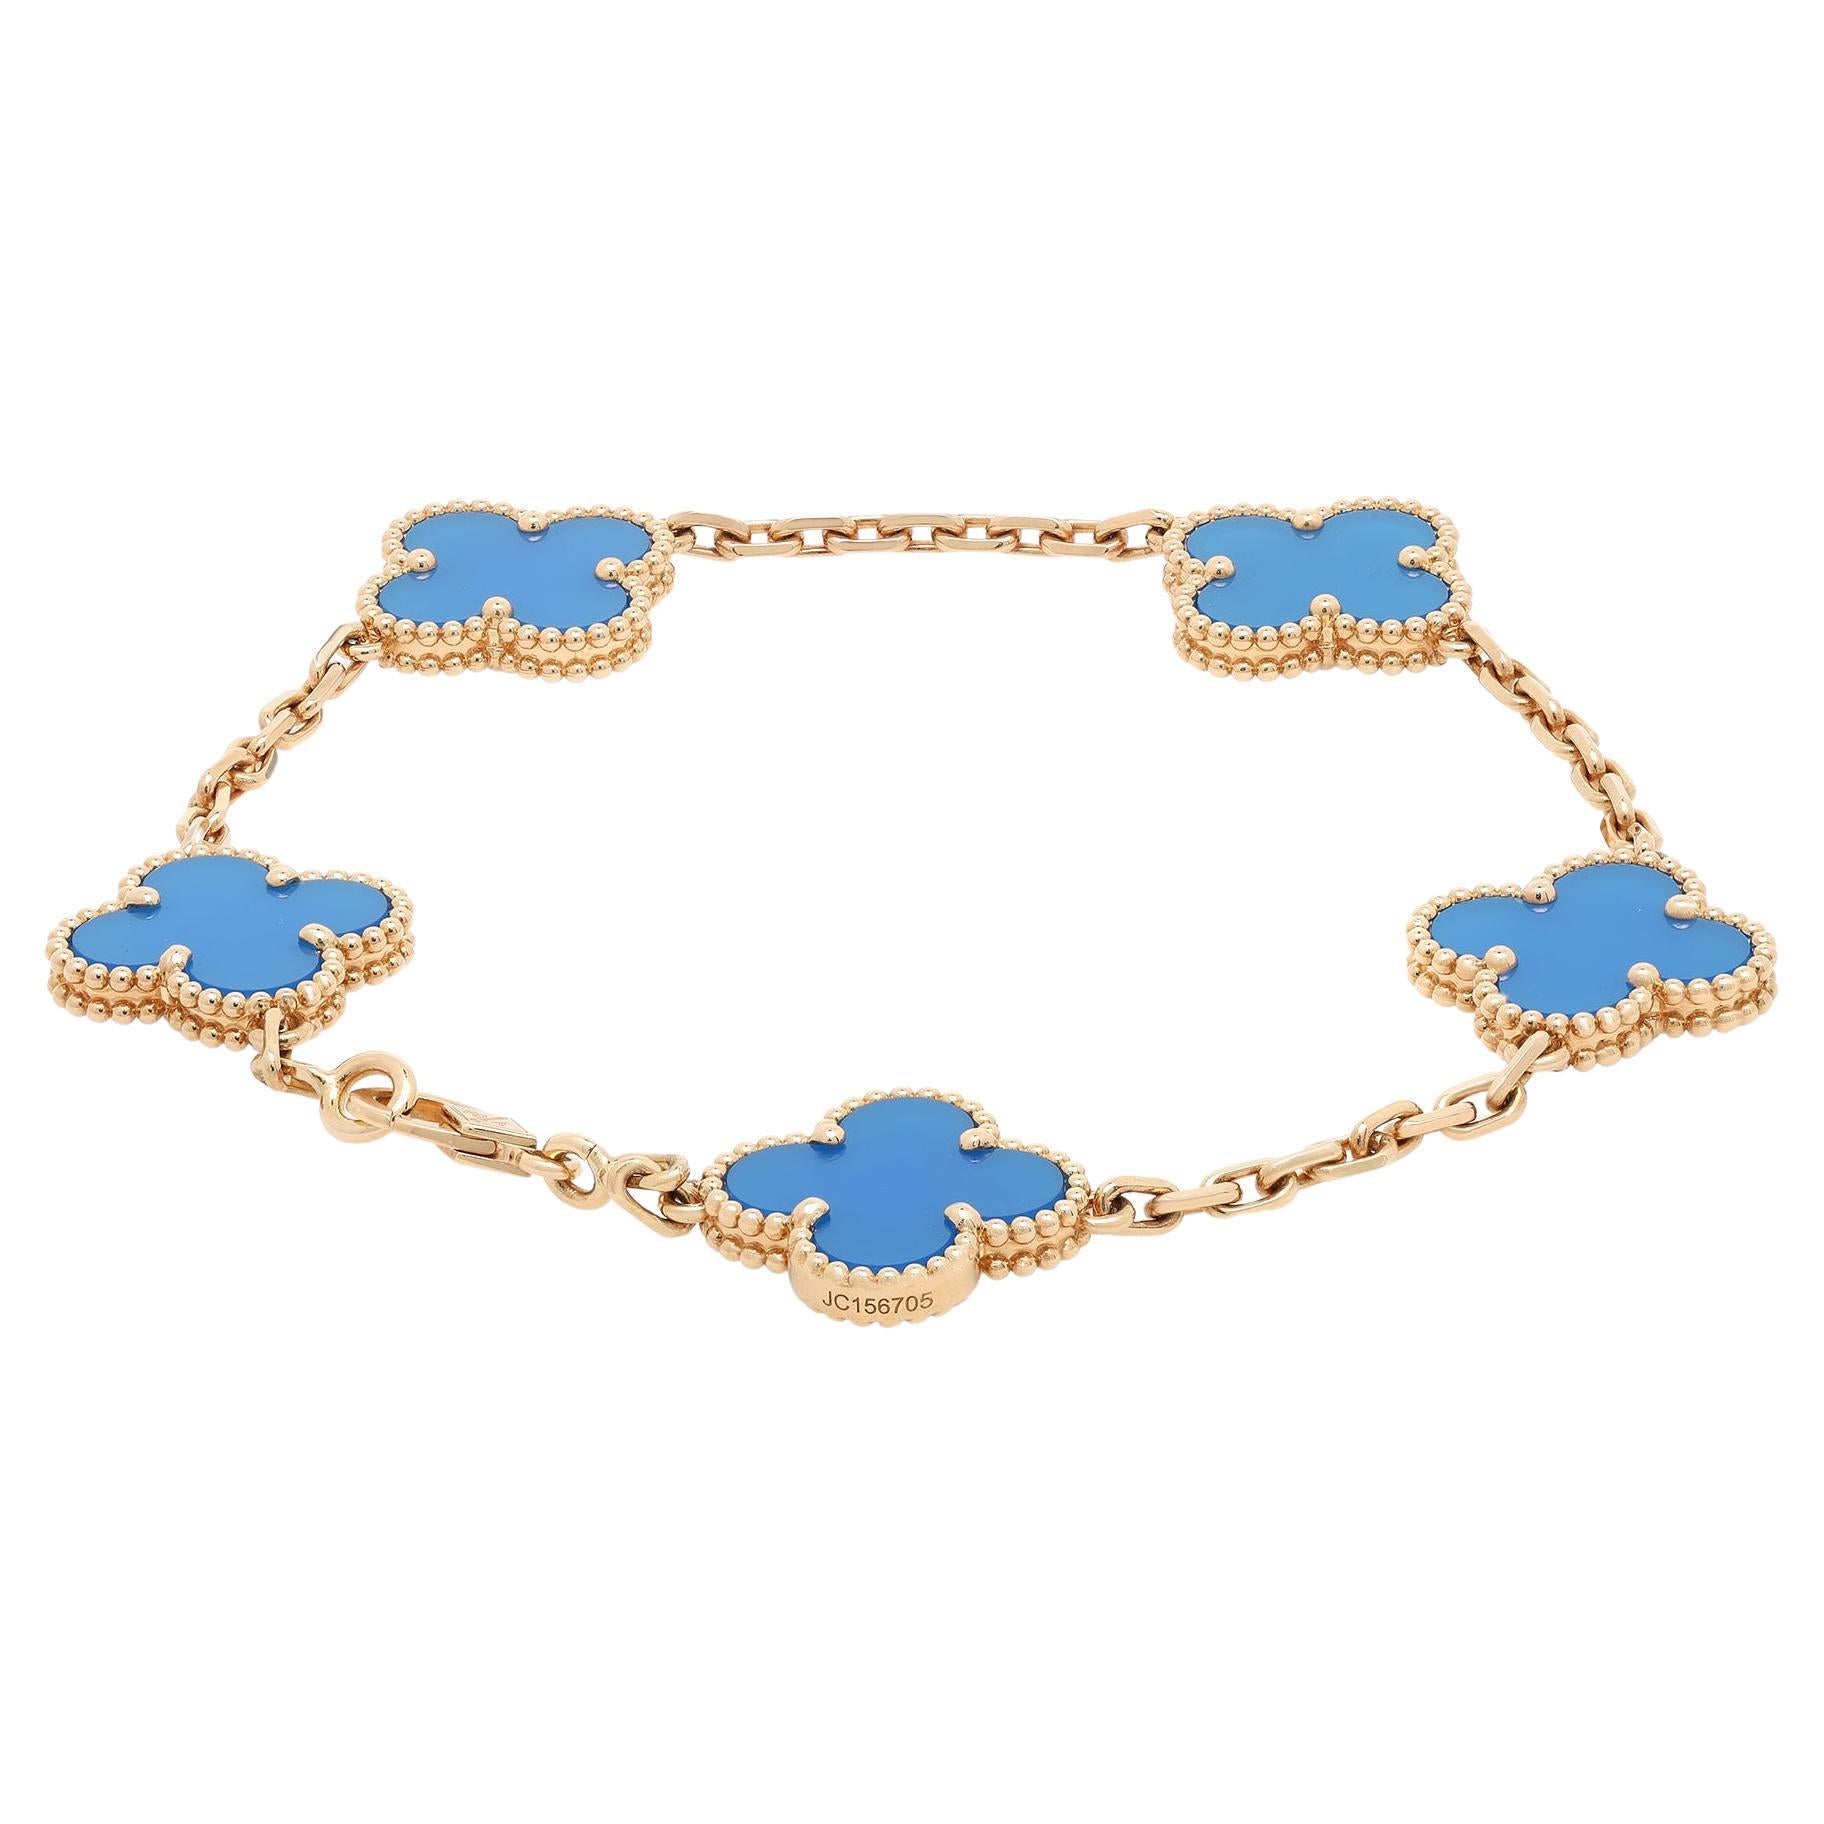 This stunning Van Cleef & Arpels Vintage Alhambra bracelet features 5 blue Agate stone motifs inspired by the clover leaf. These icons of luck are adorned with a border of golden beads that lends the final touch to the design aesthetic. Crafted in